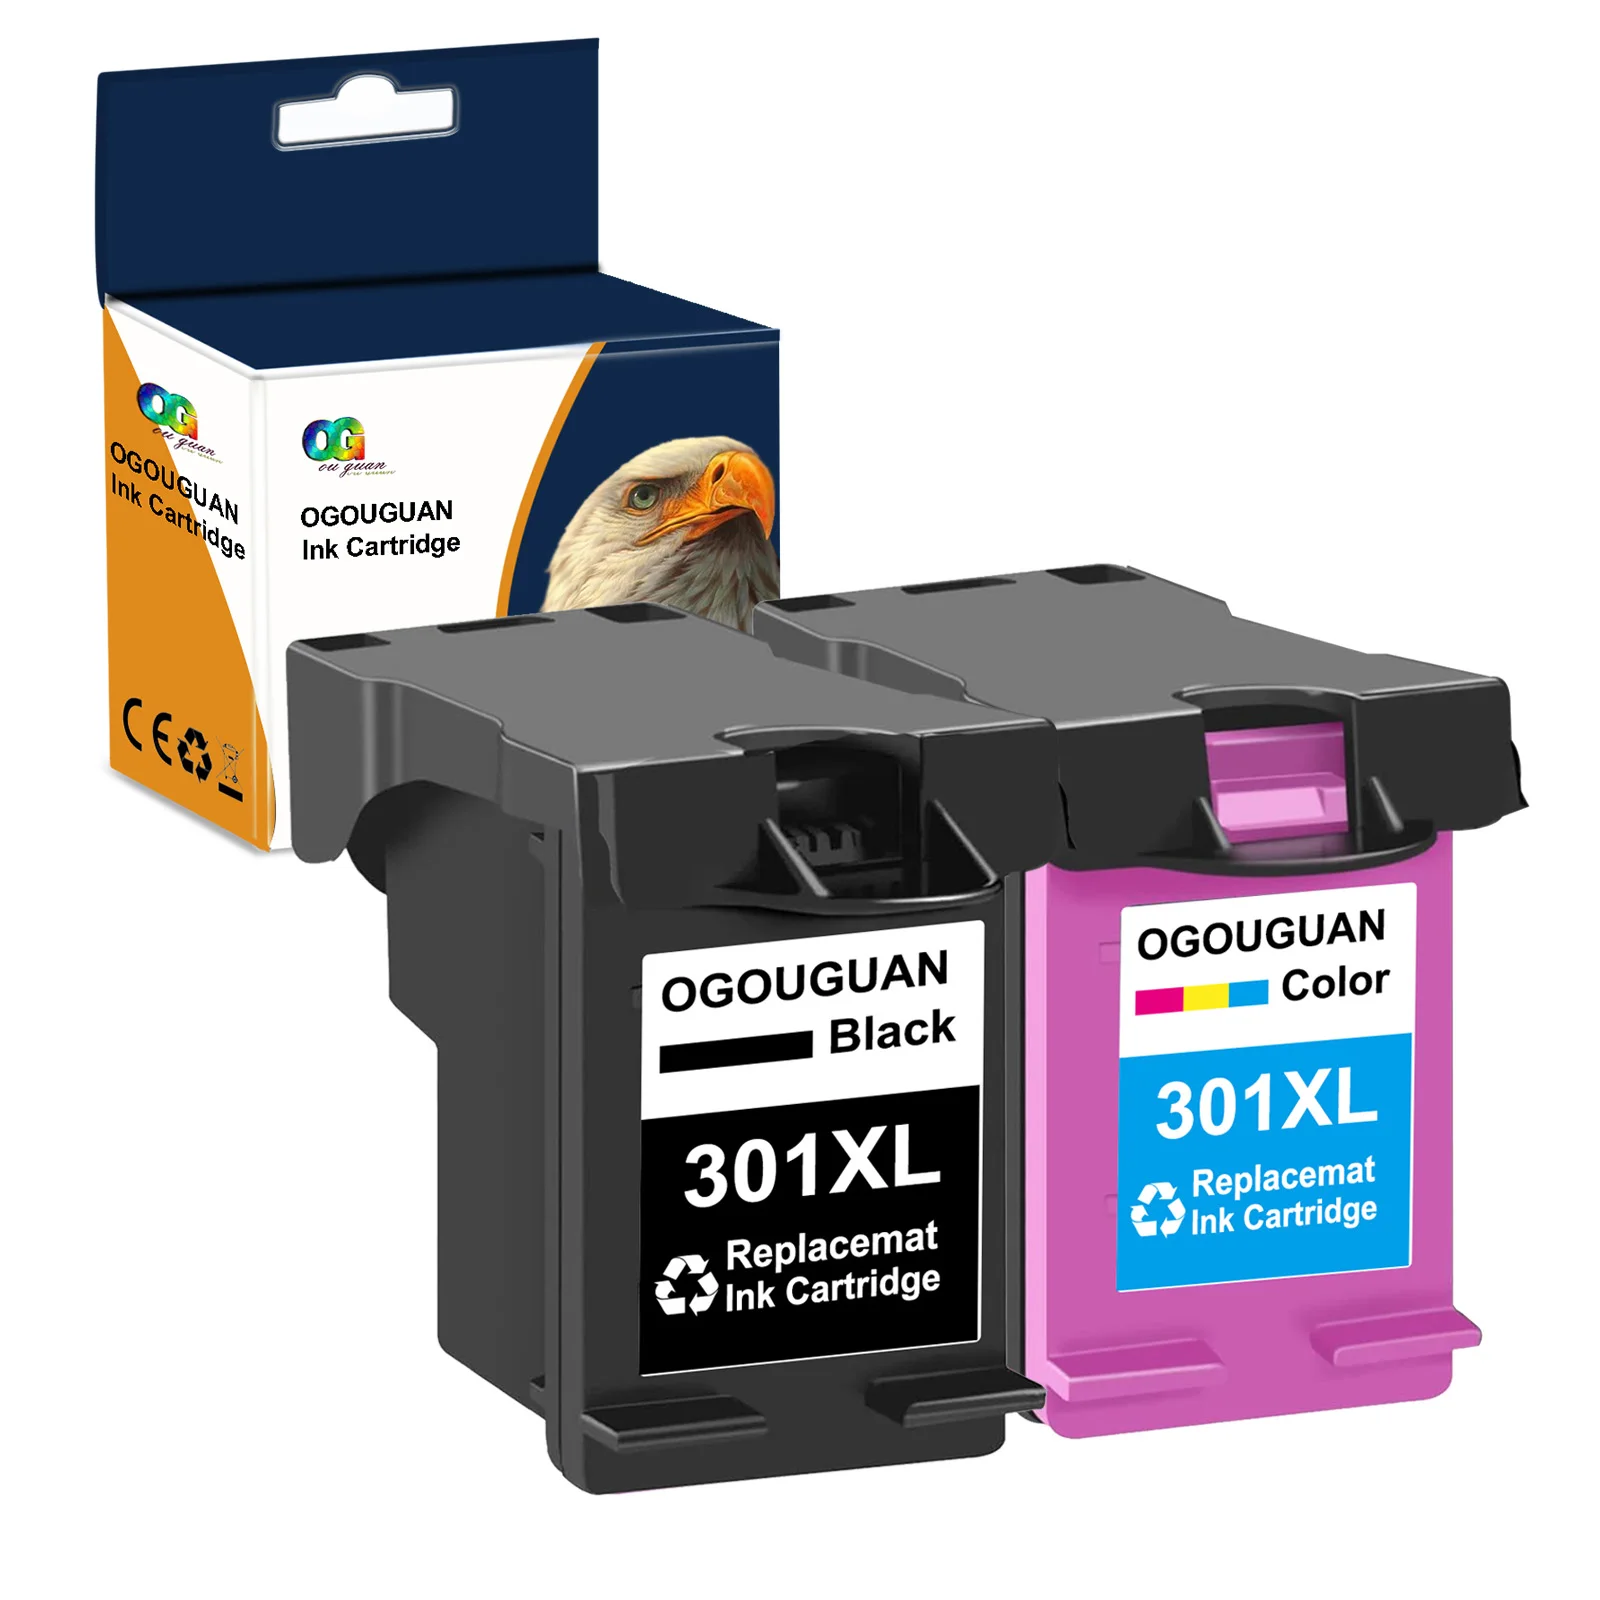 BADA Ink Cartridge Replacement for HP 301 HP301 XL 1000 1010 1050 1050A  2050 4500 4501 4502 4503 4504 4505 4507 4508 Printer